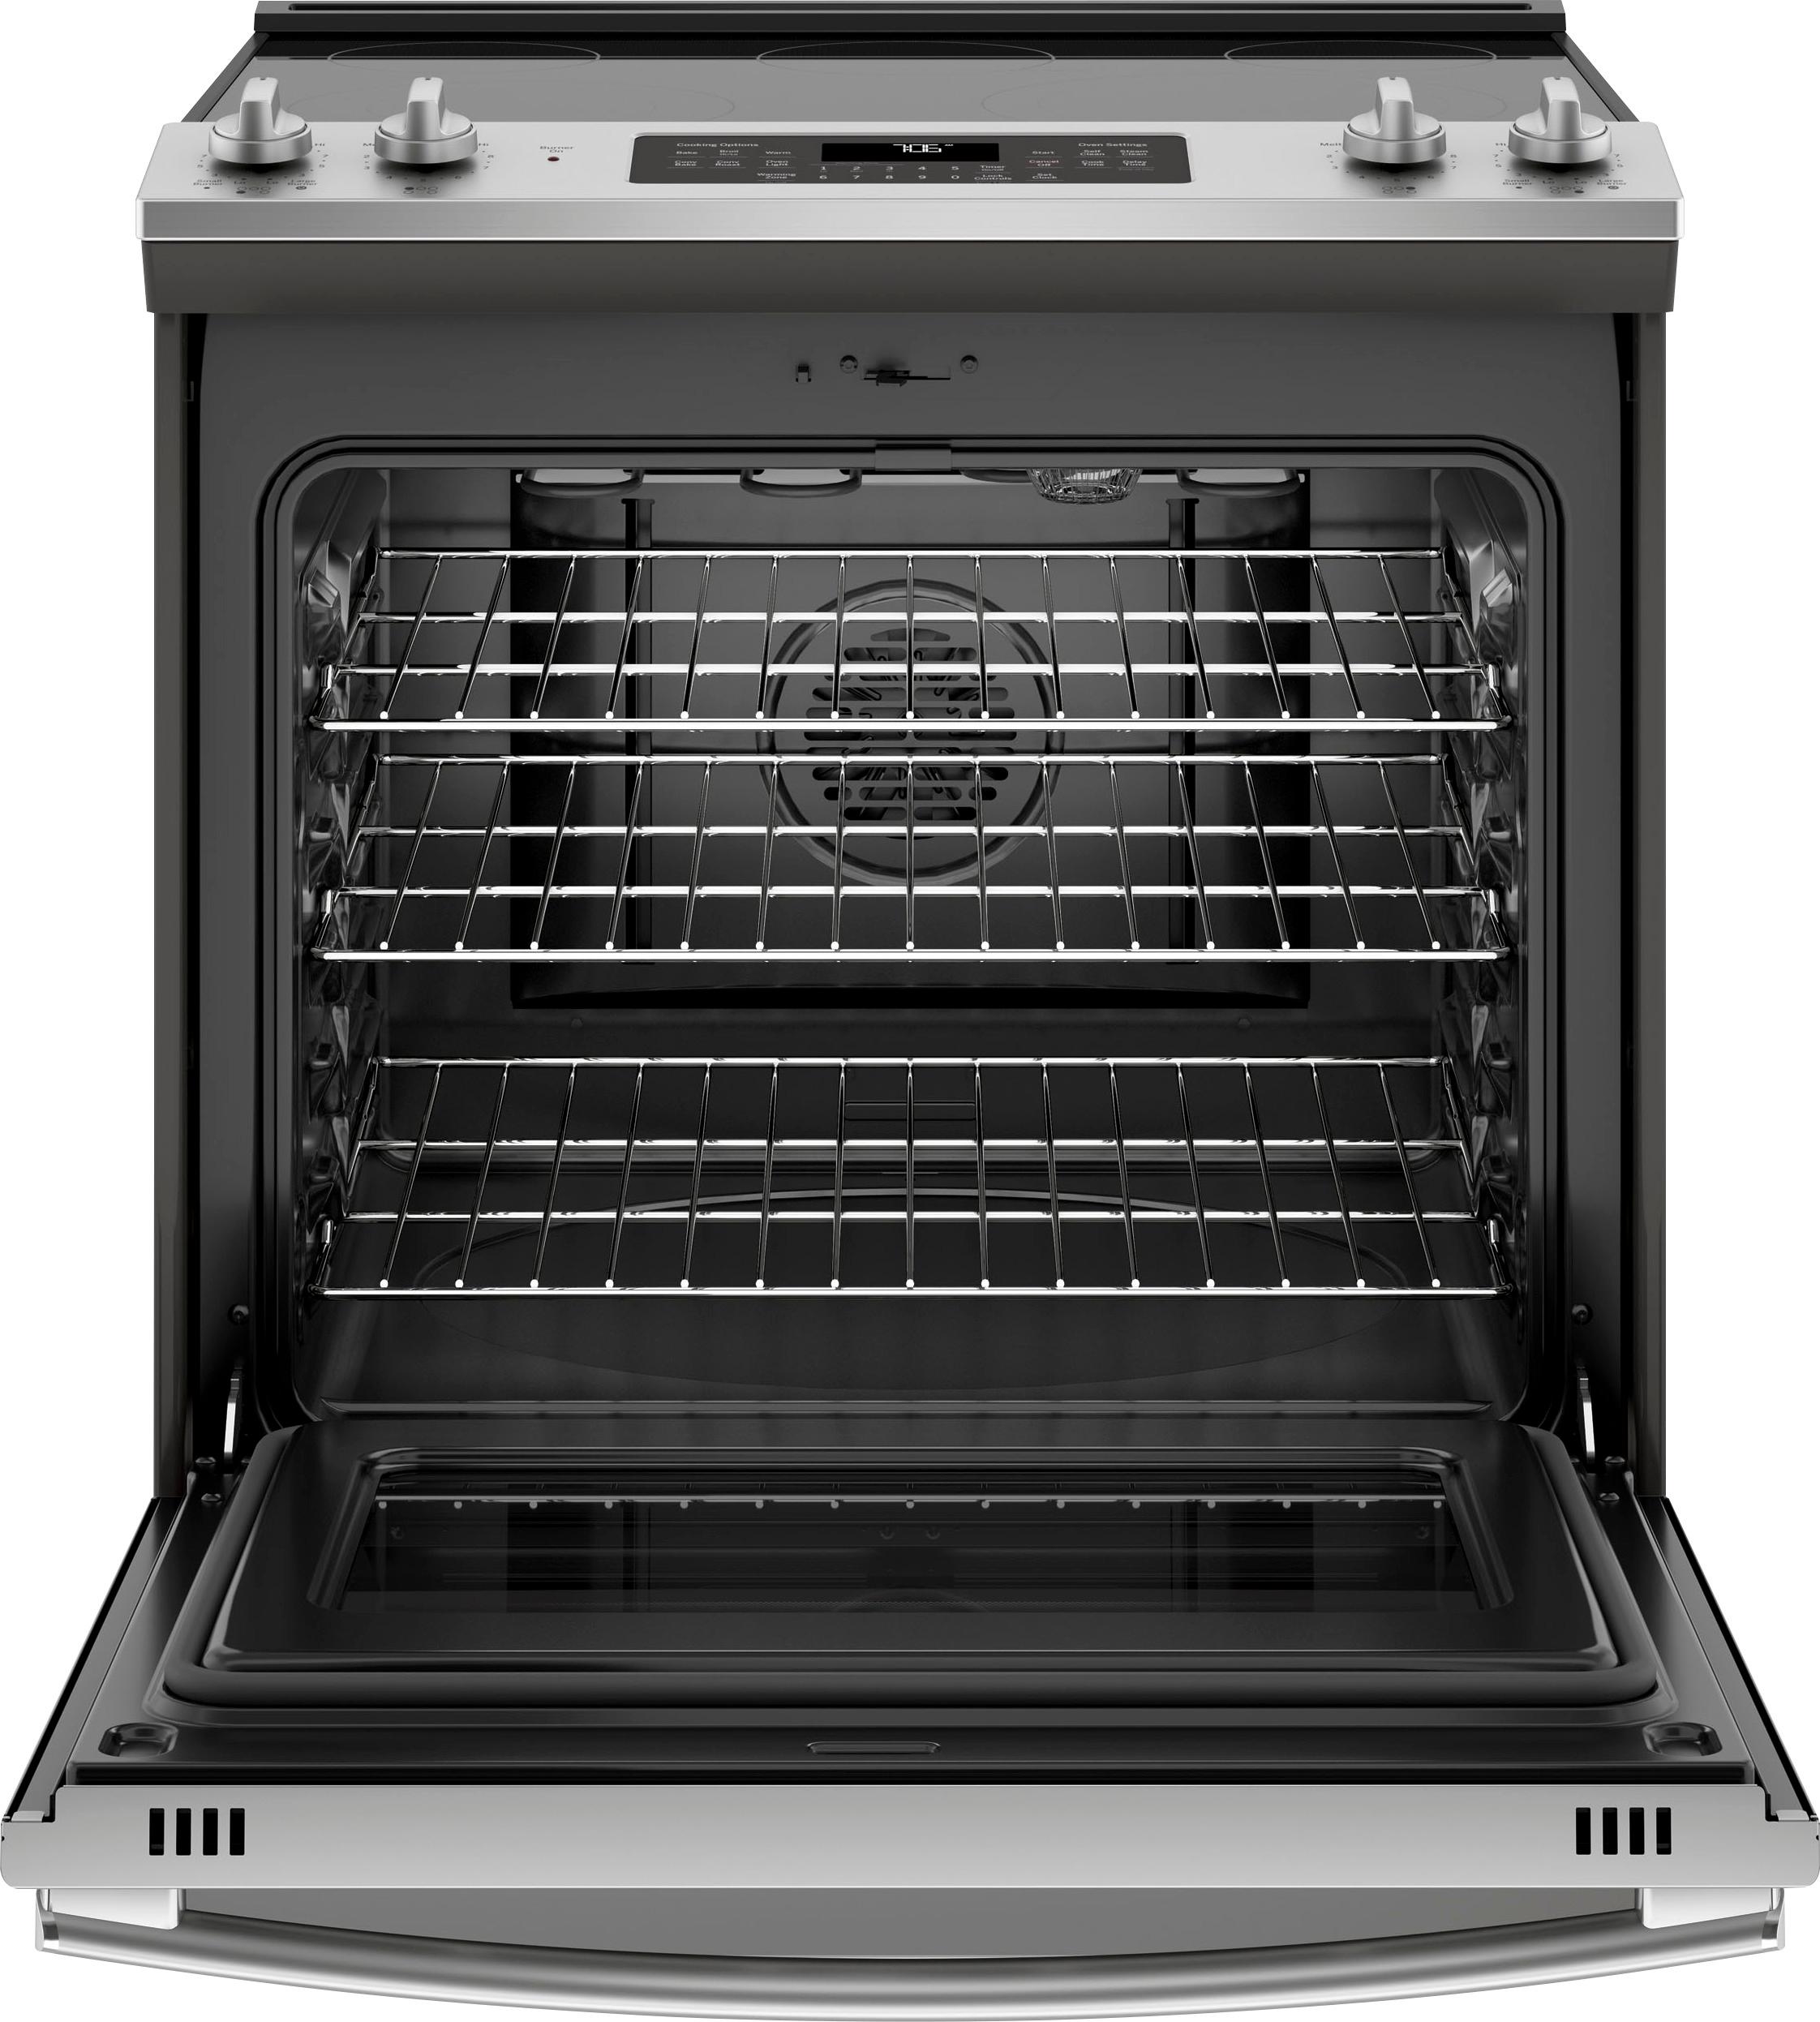 Angle View: GE - 5.3 Cu. Ft. Slide-In Electric Convection Range - Black stainless steel